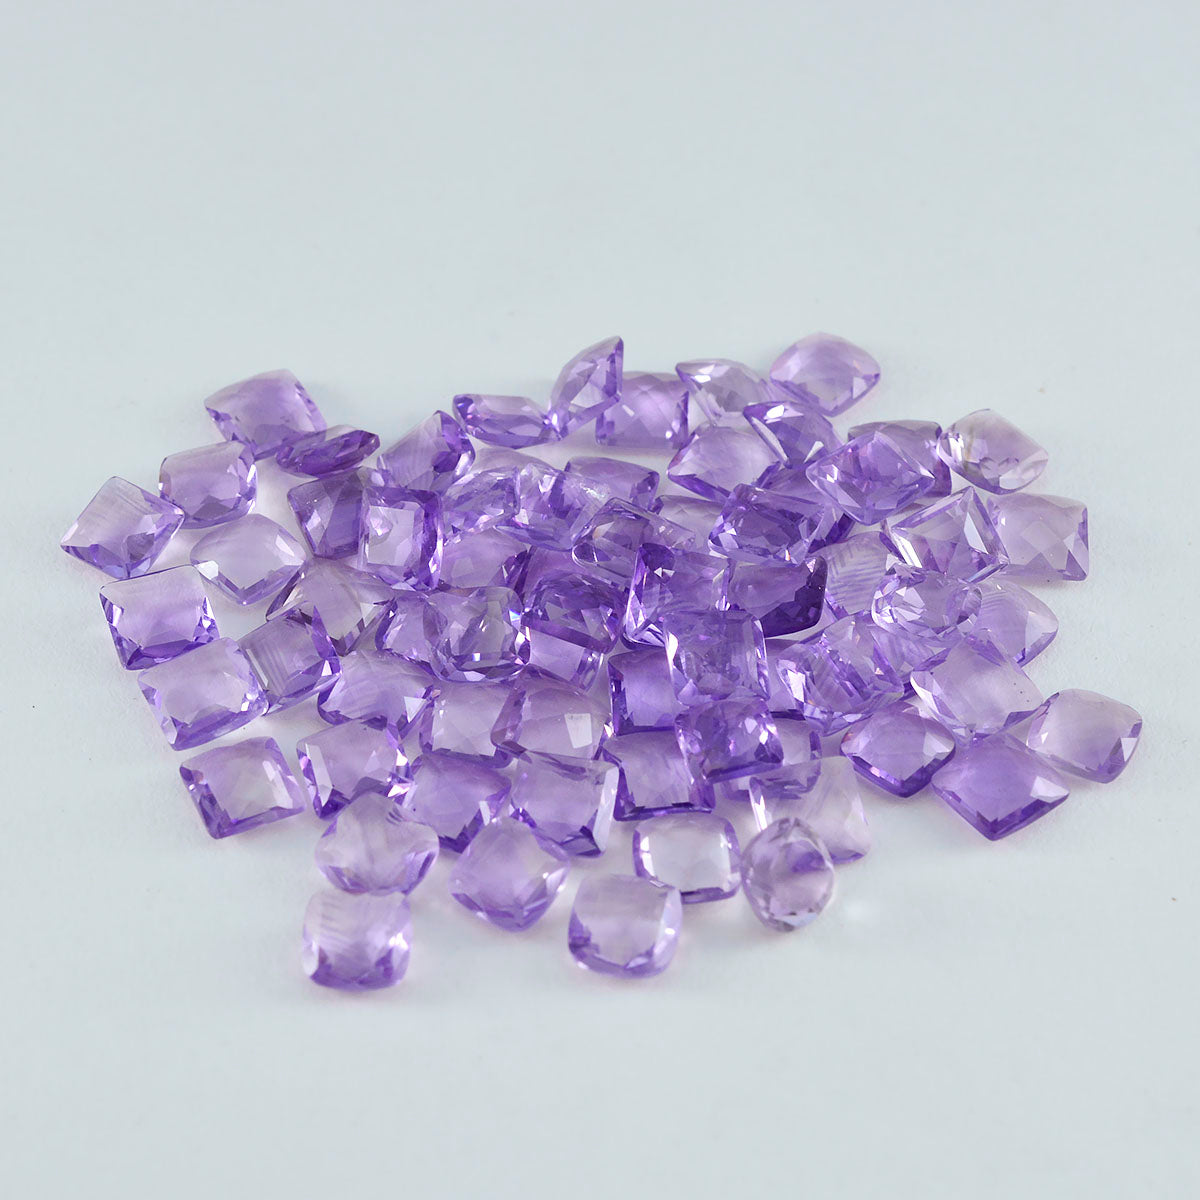 Riyogems 1PC Natural Purple Amethyst Faceted 5x5 mm Square Shape A1 Quality Loose Stone